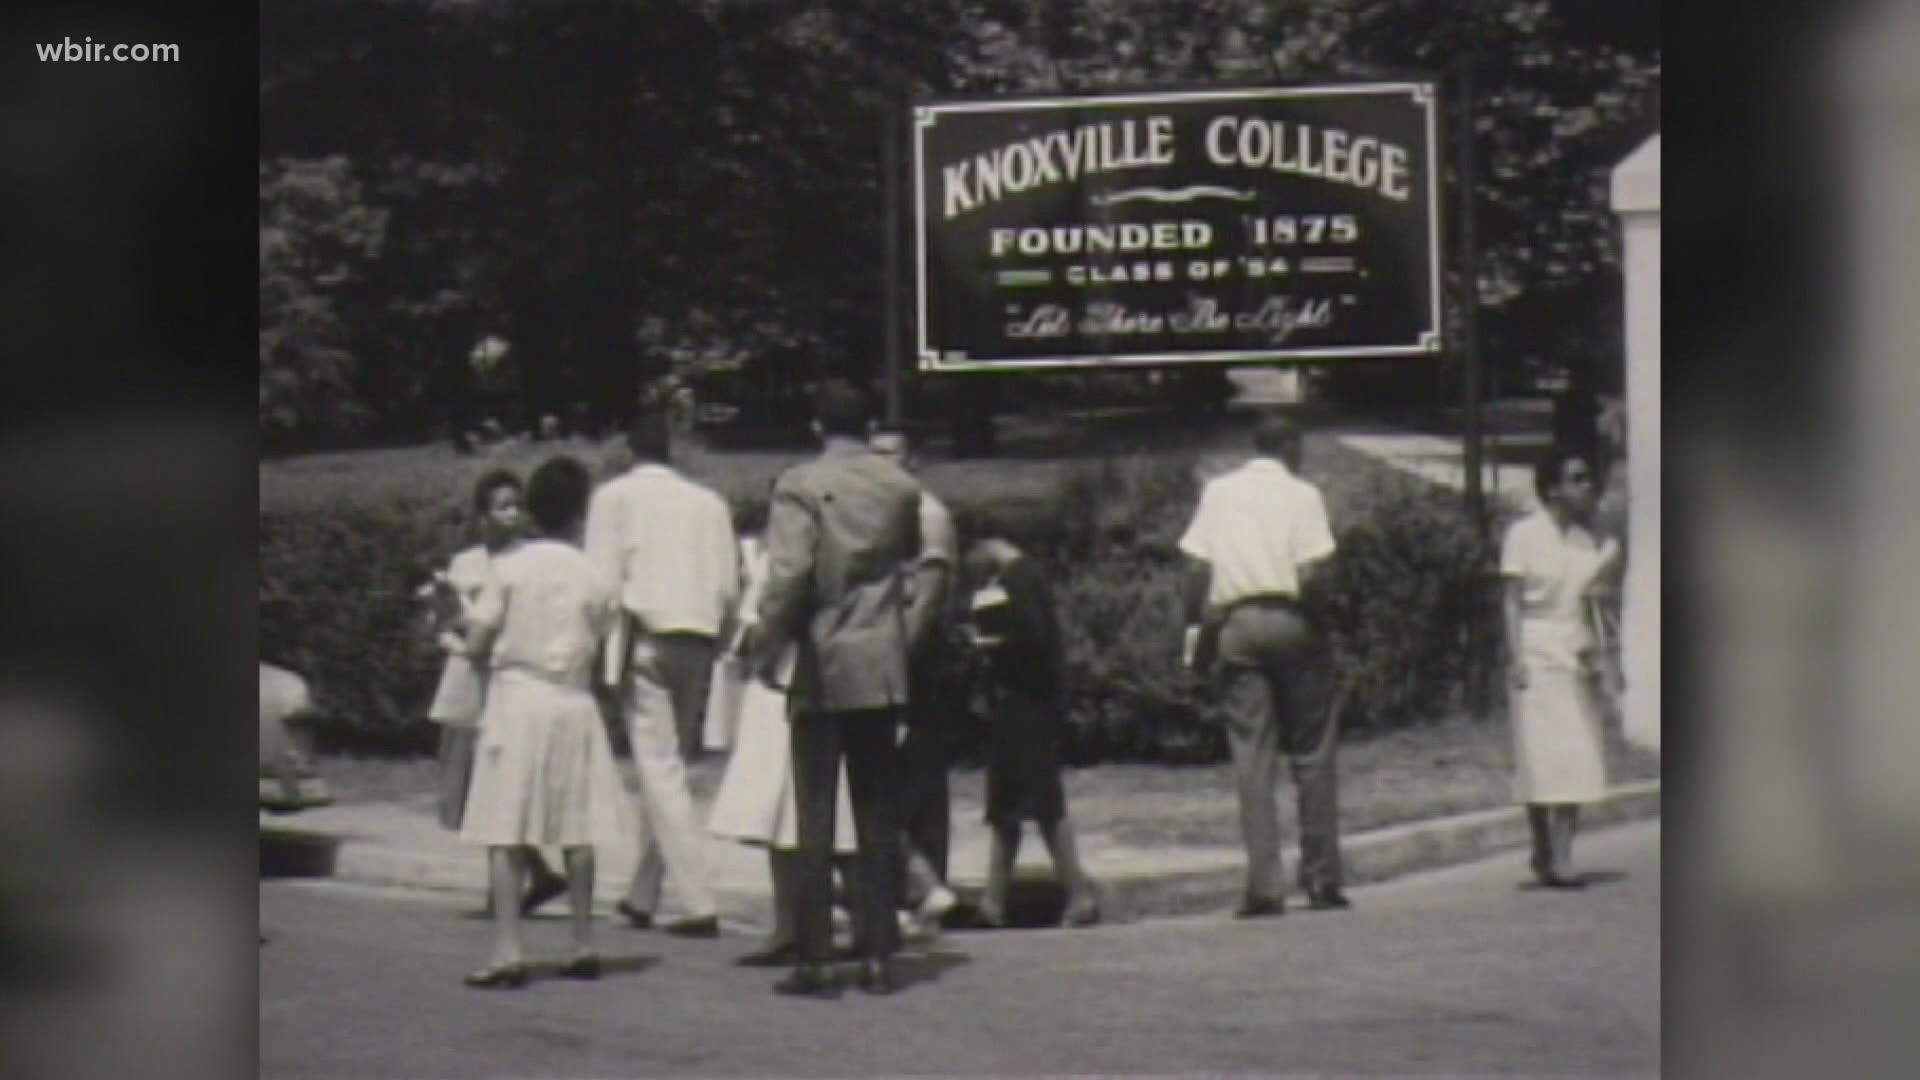 A historically Black college that opened just a decade after enslavement was abolished has faced financial struggles for decades.